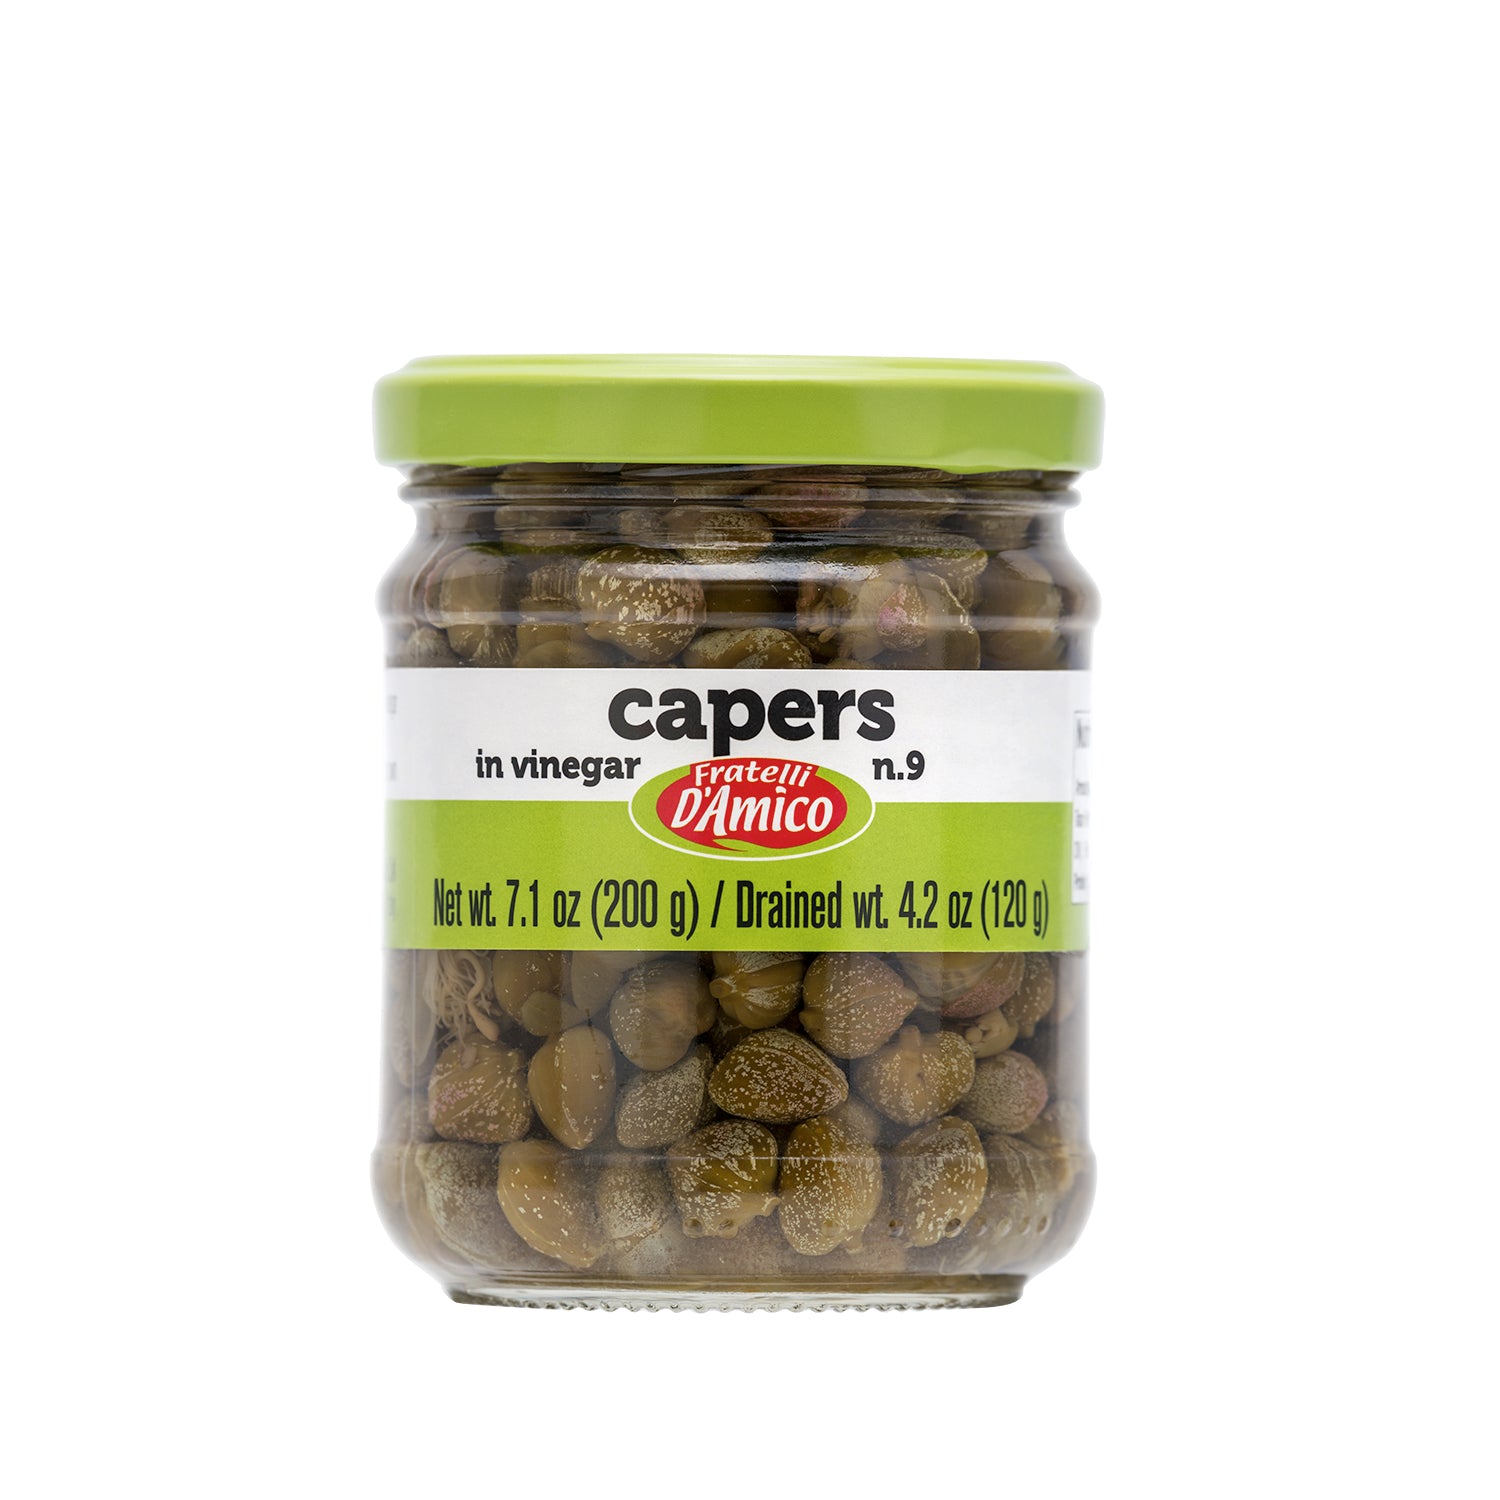 Fratelli D'Amico, Capers, 9, Italian Capers in Brine, Jar, 7.1 oz (200g), Product of Italy